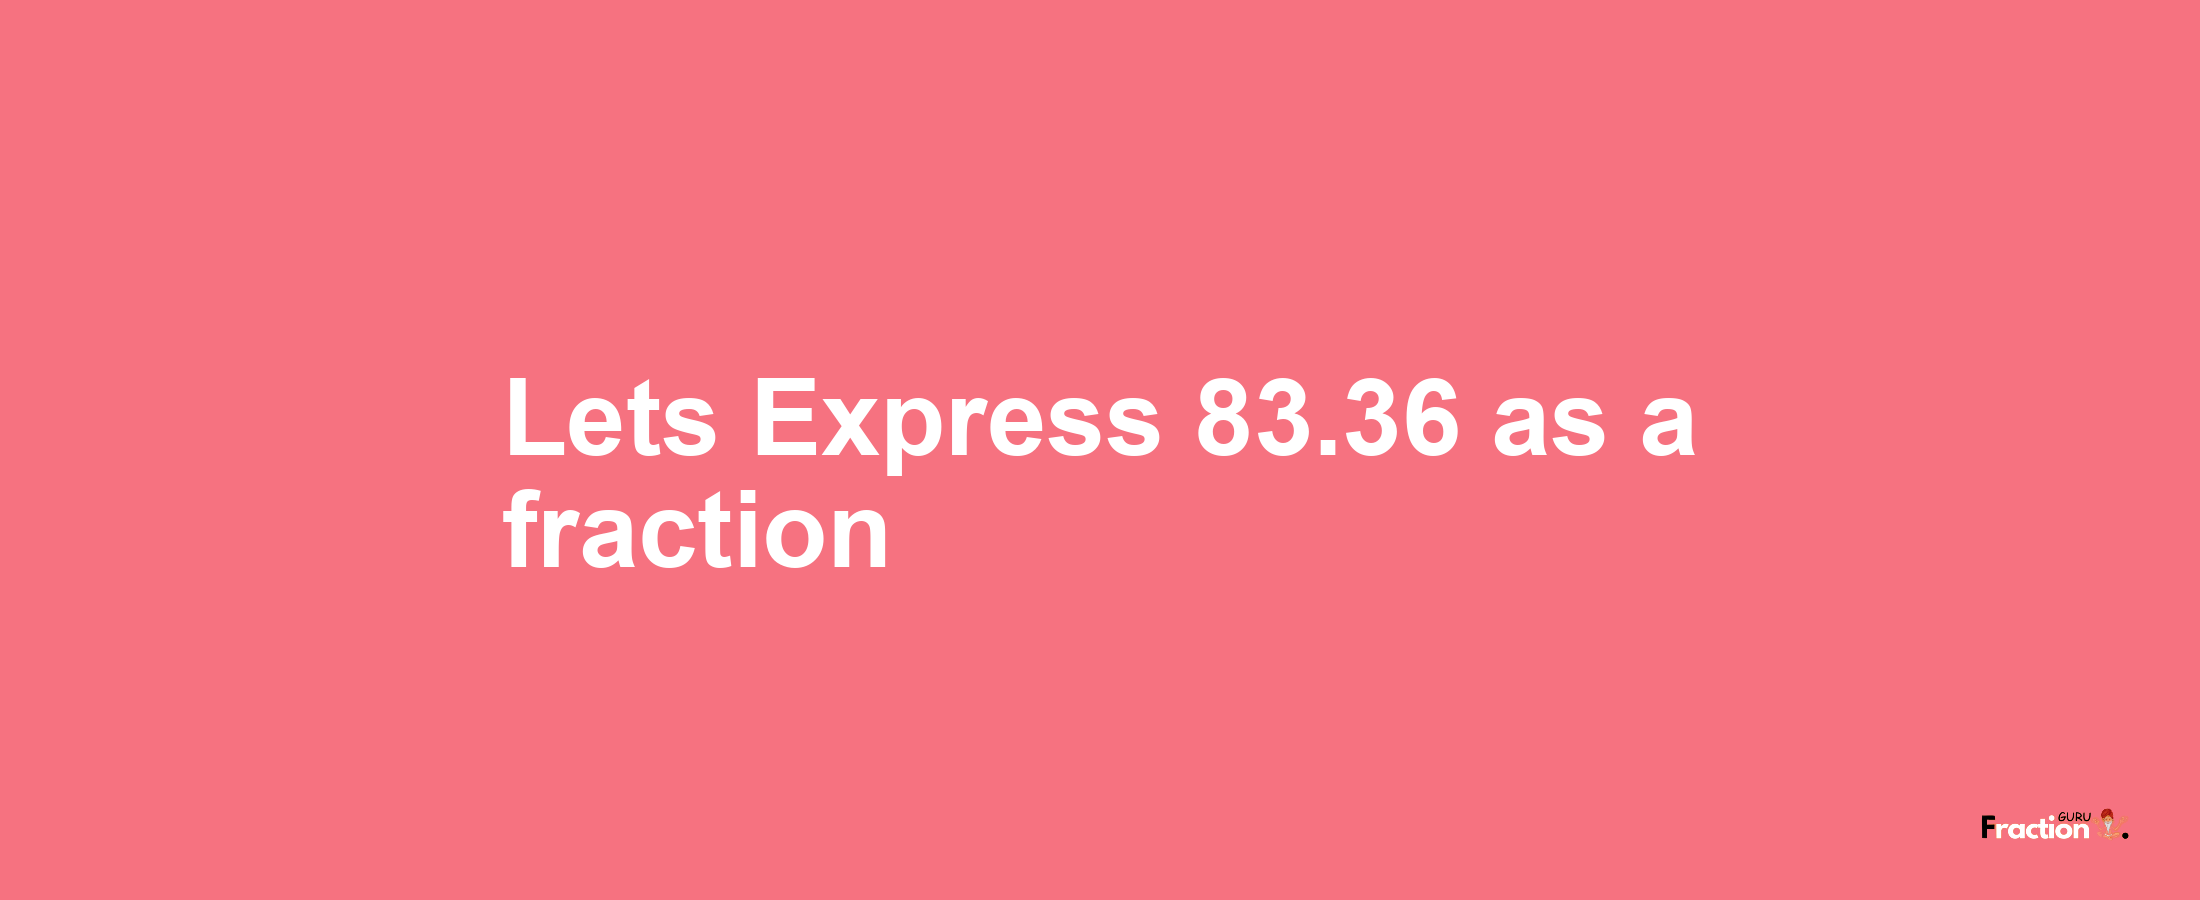 Lets Express 83.36 as afraction